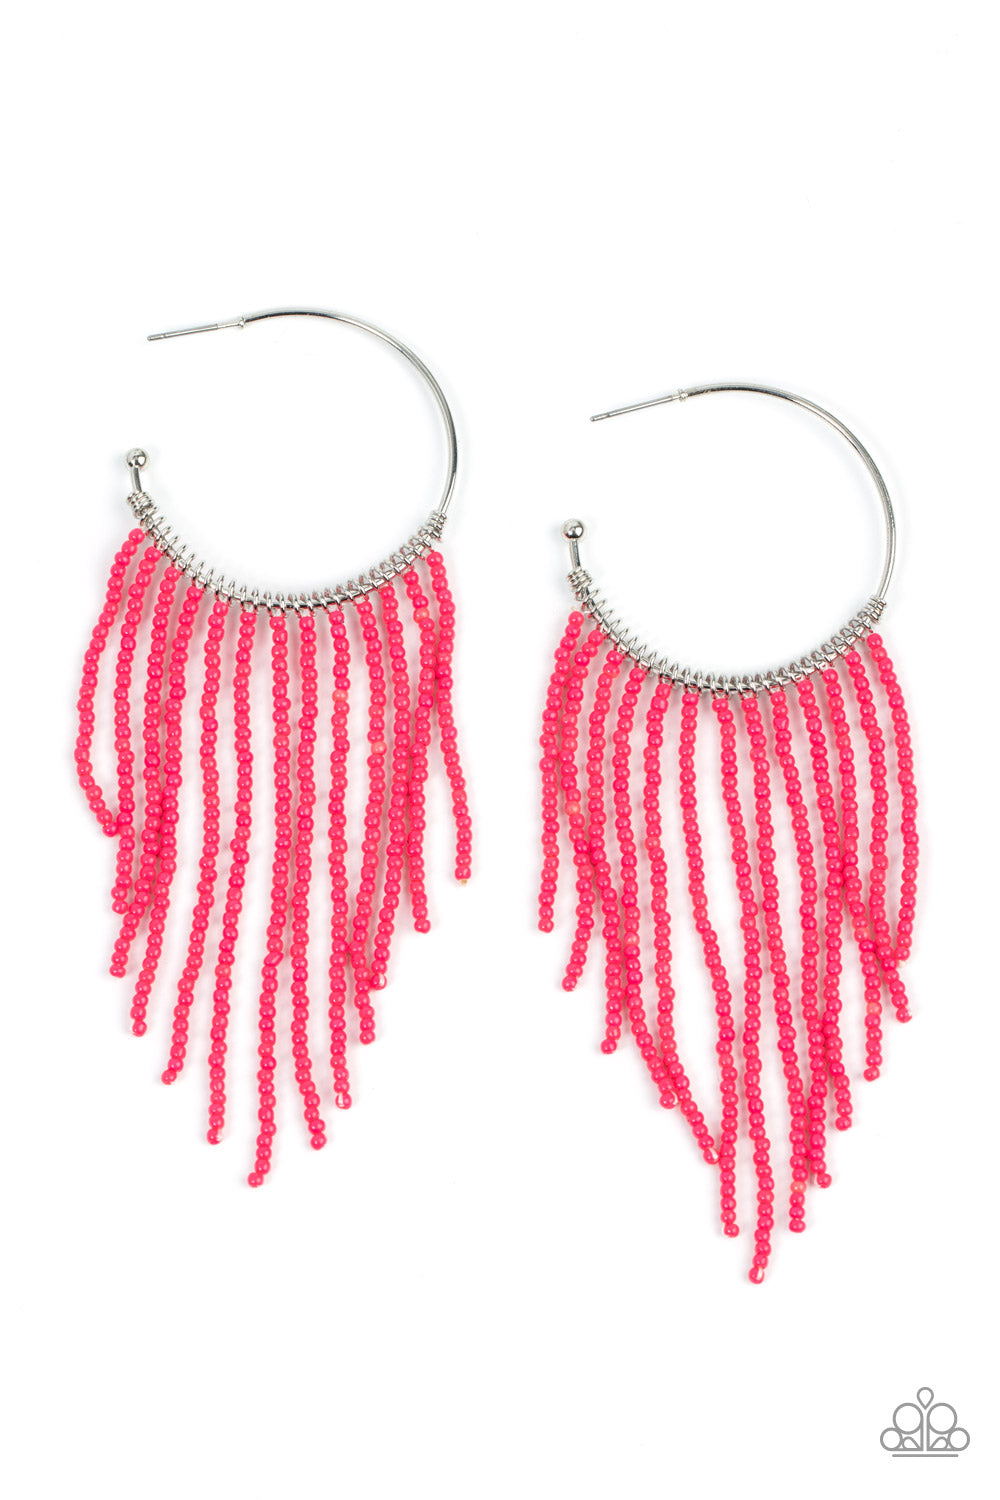 Paparazzi Accessories Saguaro Breeze - Pink Strands of dainty pink seed beads stream out from the bottom of a classic silver hoop, resulting in a flirtatiously tasseled look. Earring attaches to a standard post fitting. Hoop measures approximately 1 1/2"